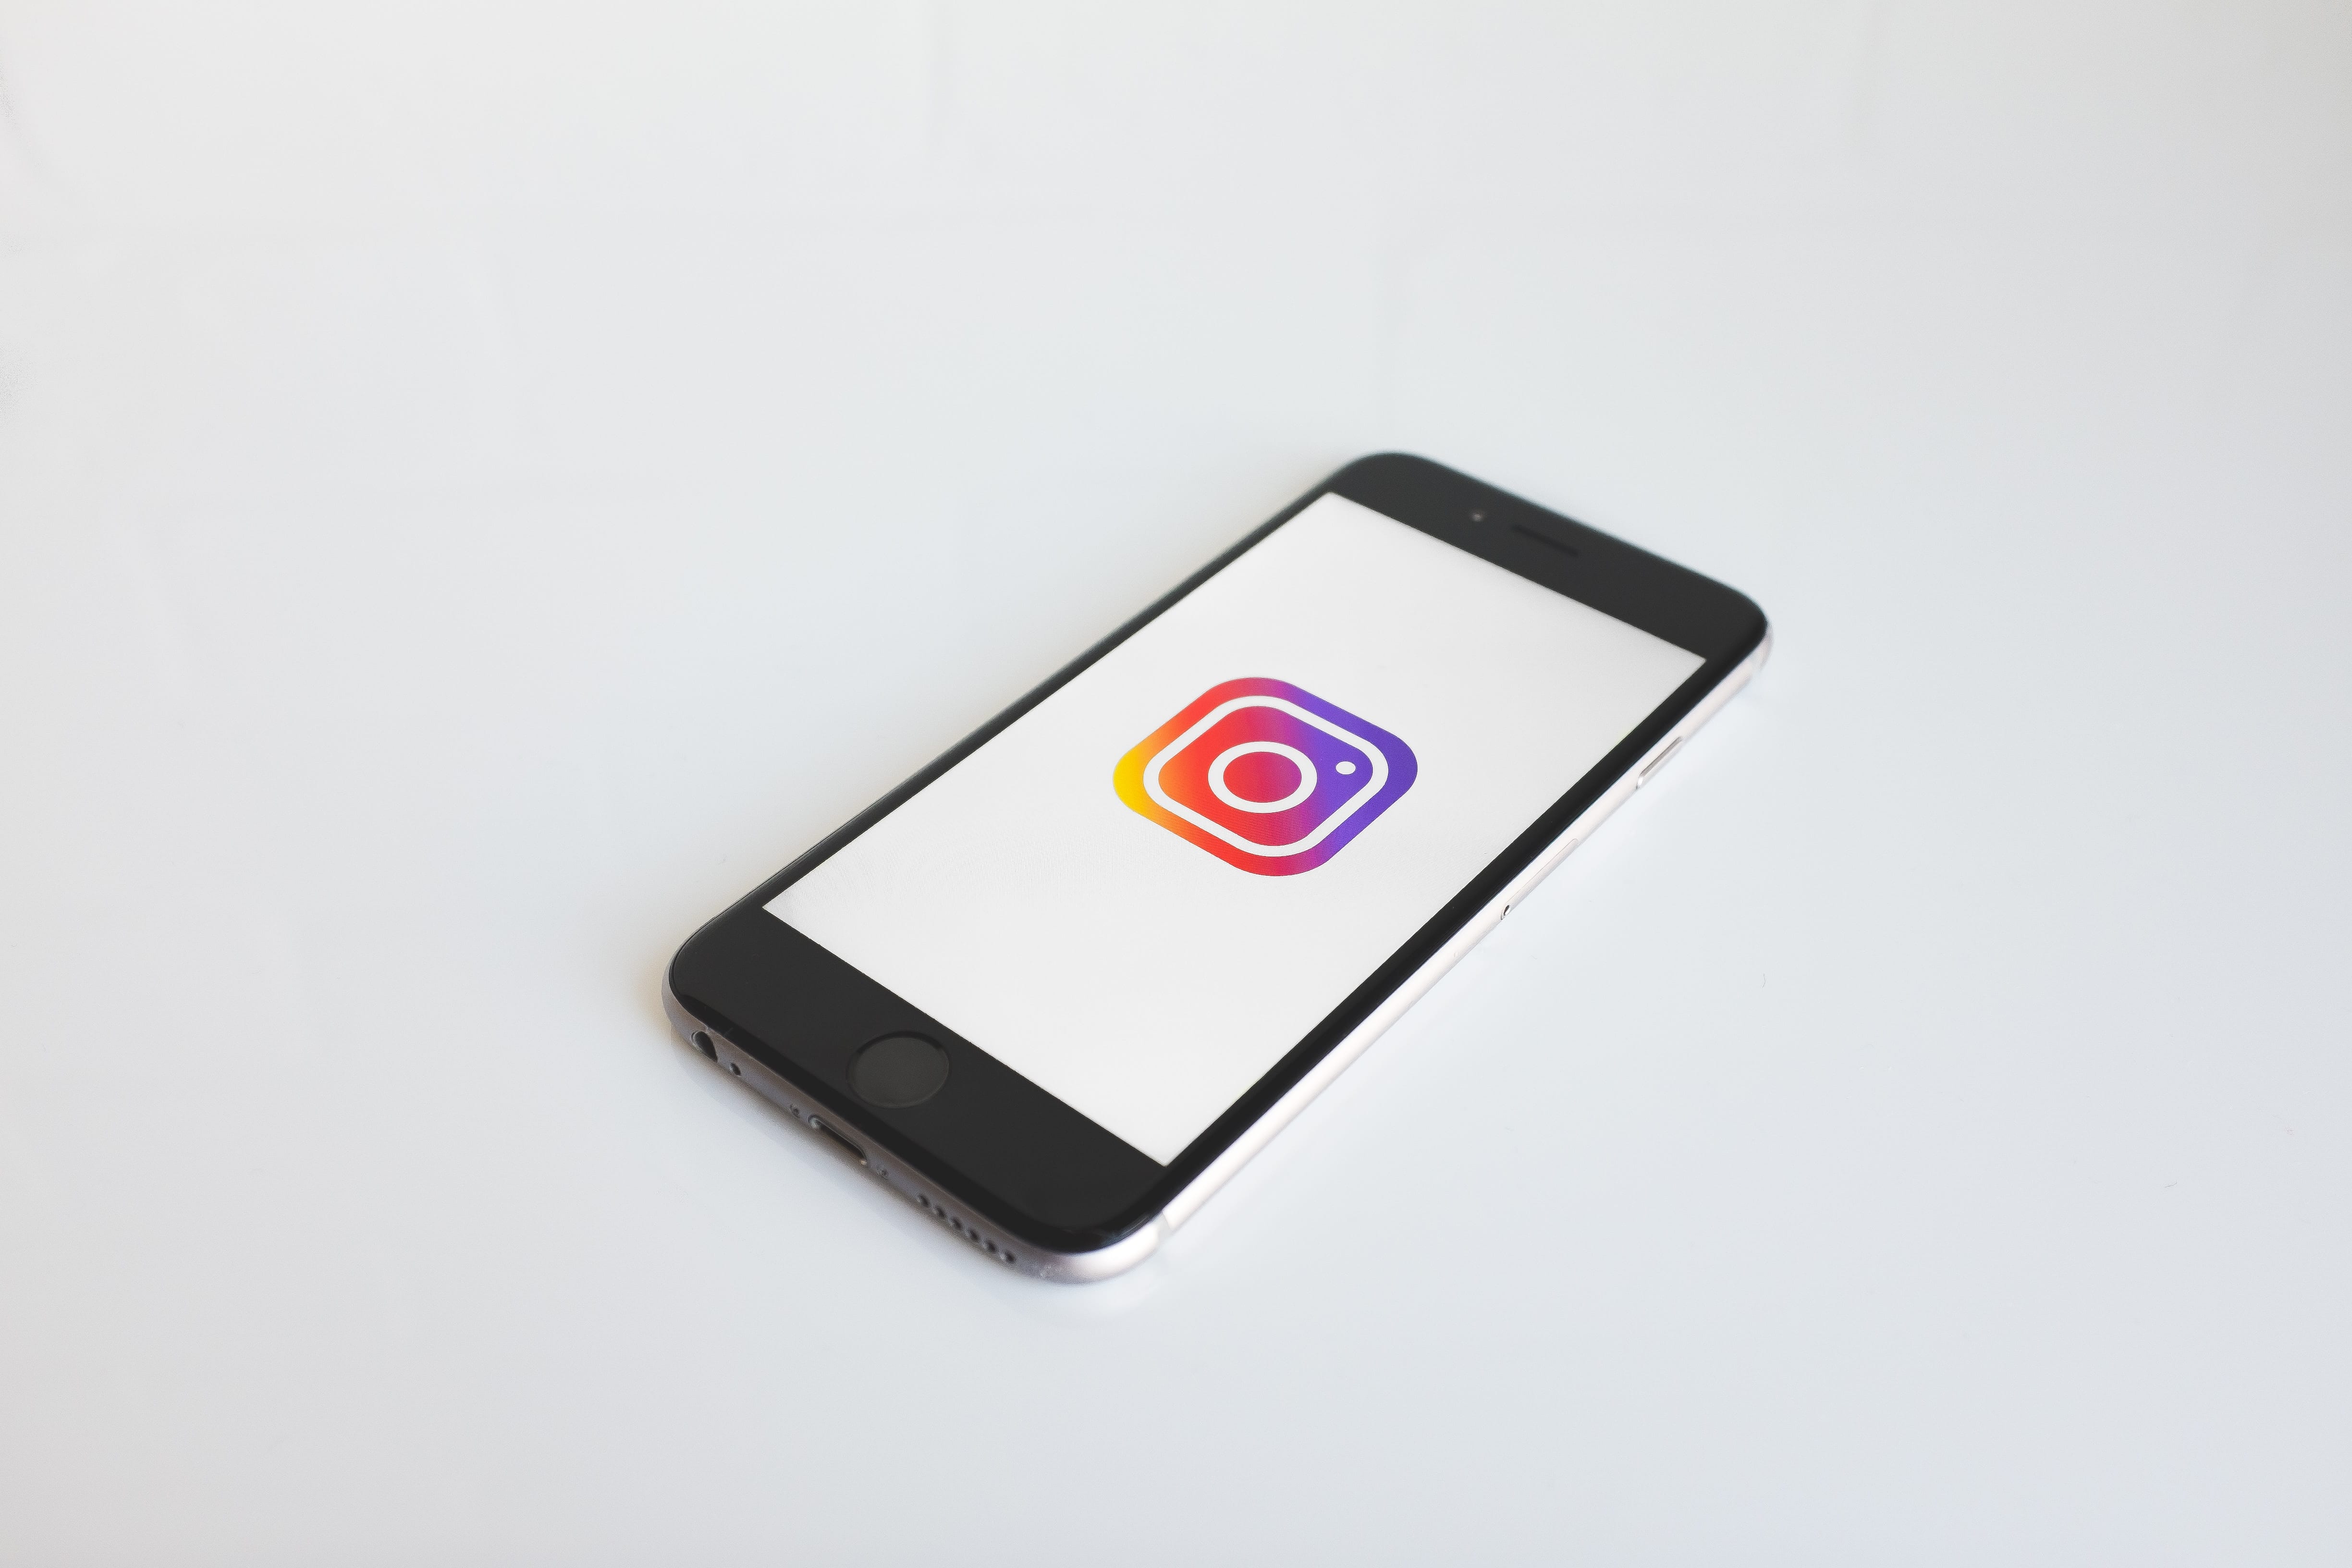 Instagram logo in space gray iPhone 6; image by NeONBRAND, via Unsplash.com.